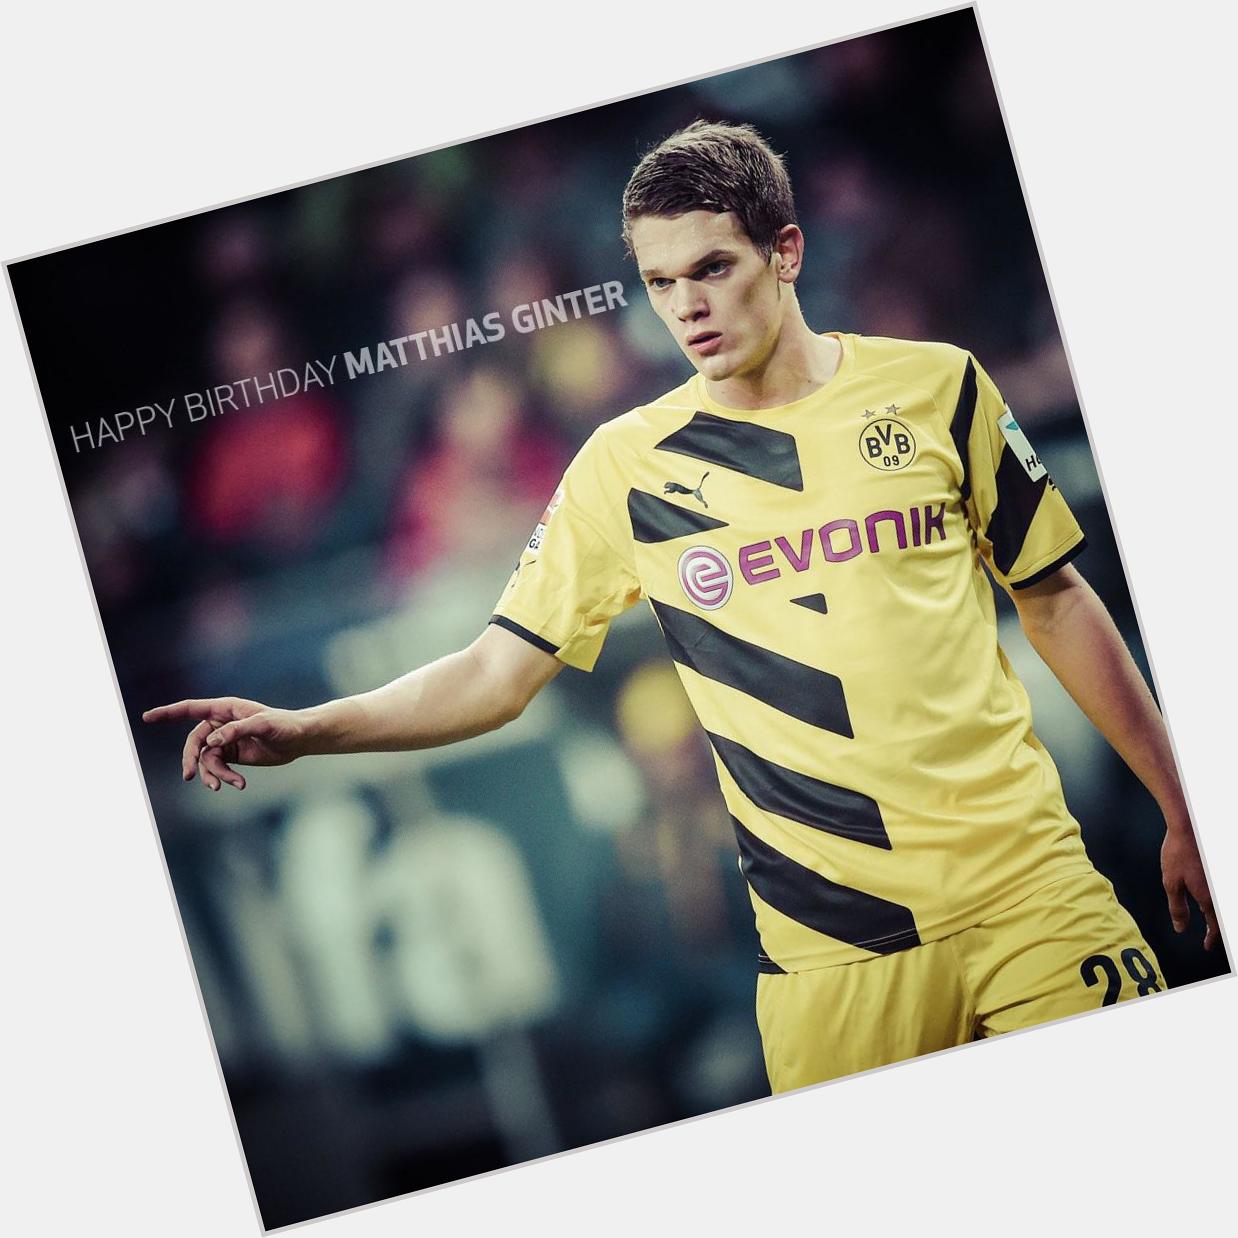 Happy 21st birthday to Matthias Ginter 

Have a great day 